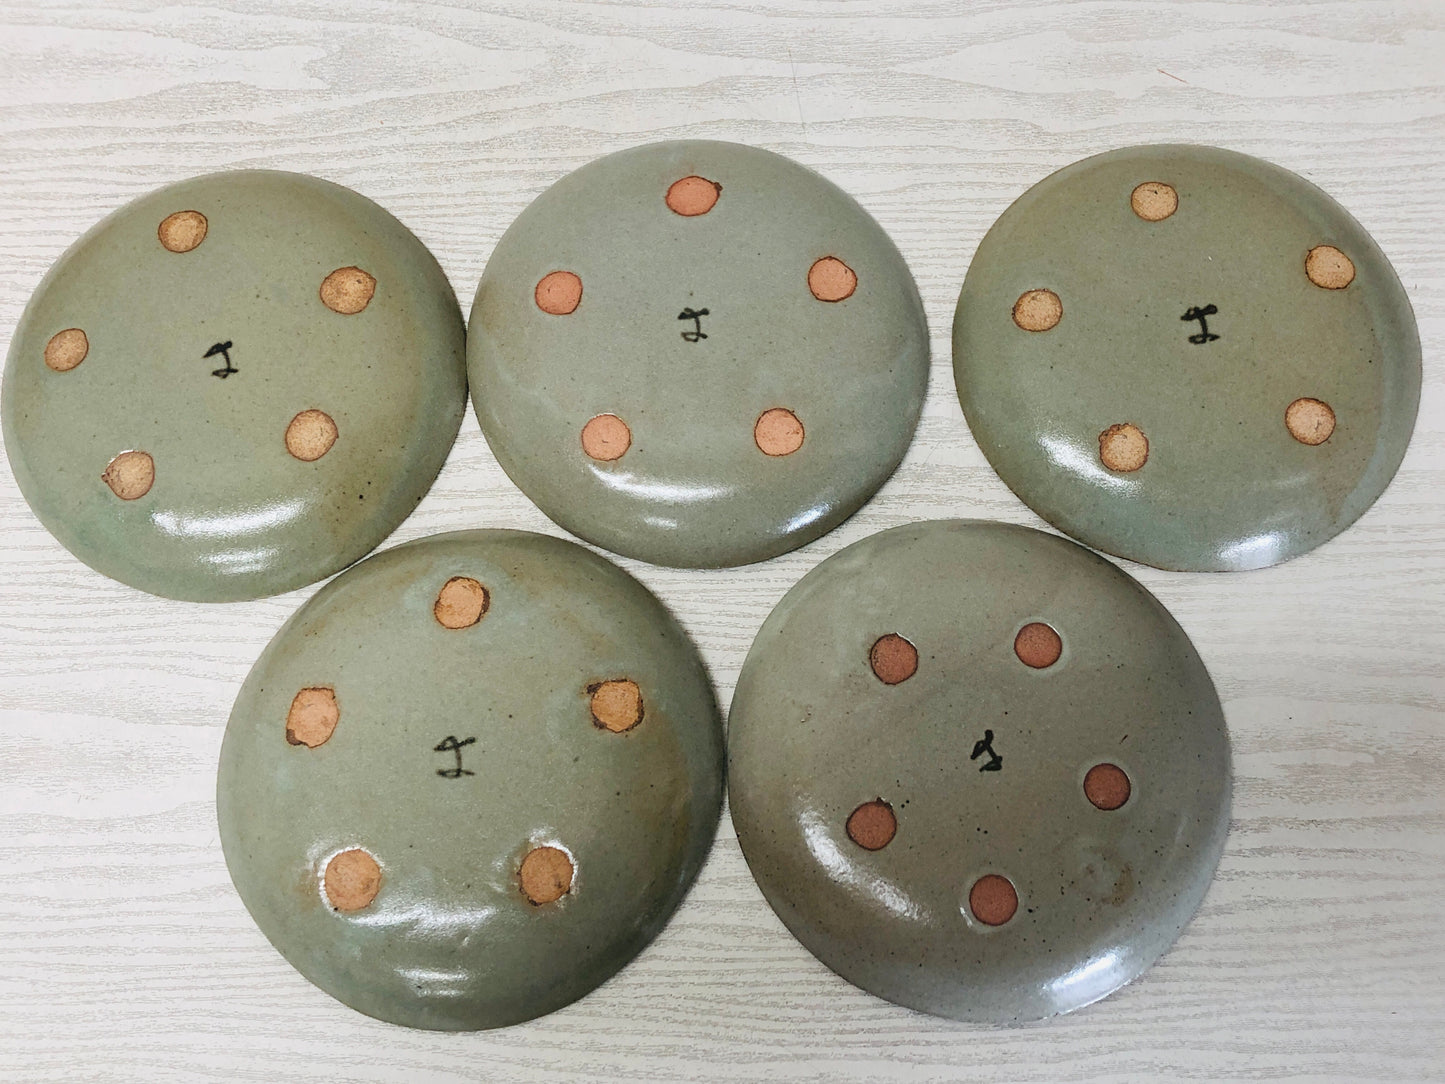 Y3180 DISH Mino-ware Plate set of 5 signed box Japan antique vintage tableware